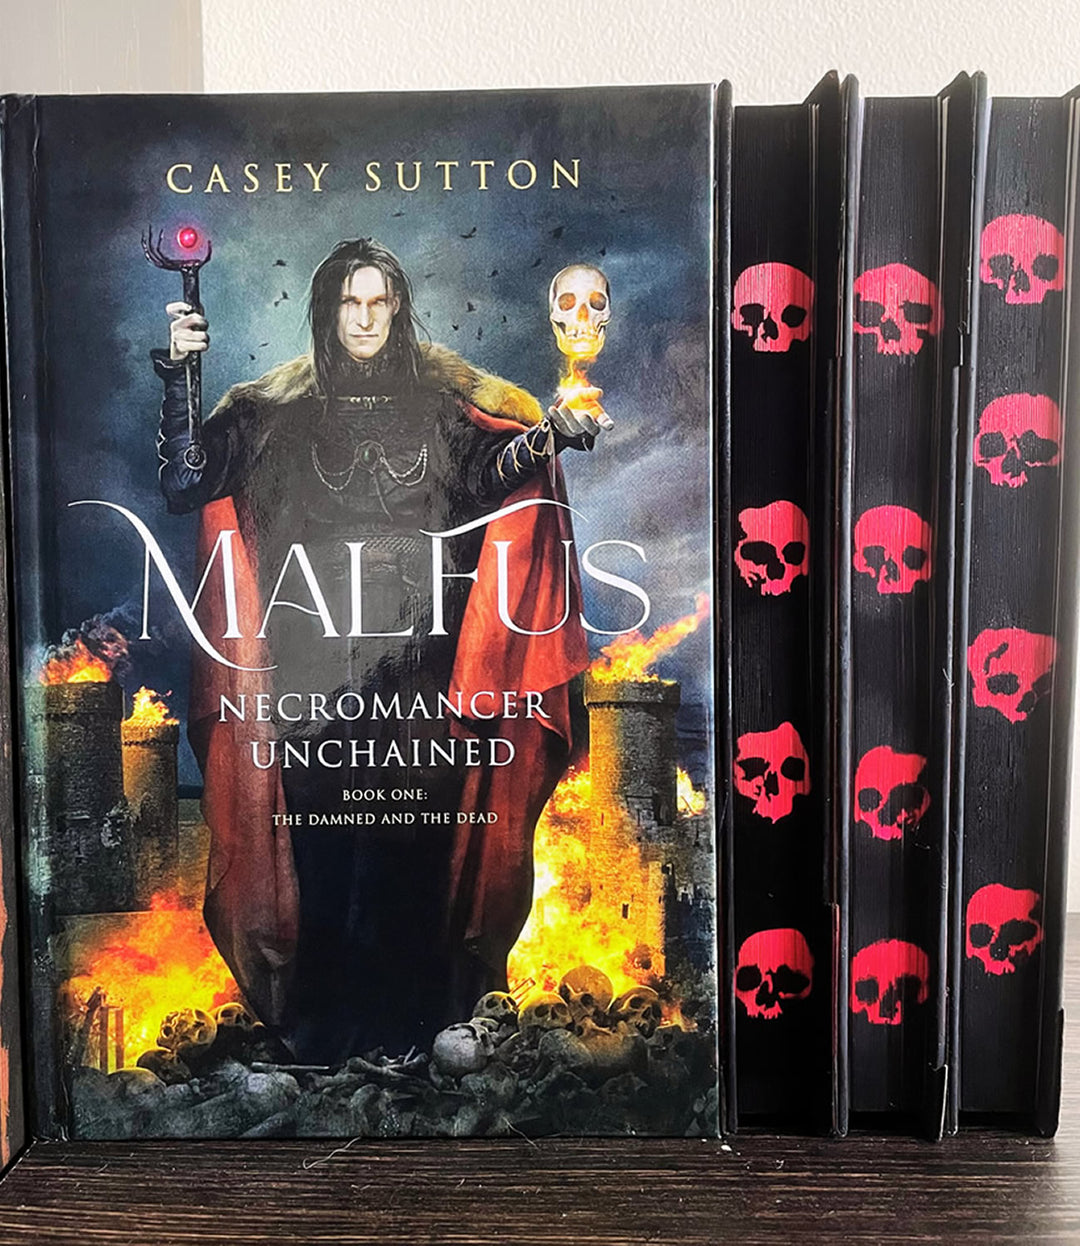 Malfus: Necromancer Unchained - SPRAYED EDGE (MUSOU Black with Red Skulls) - Signed Hardcover